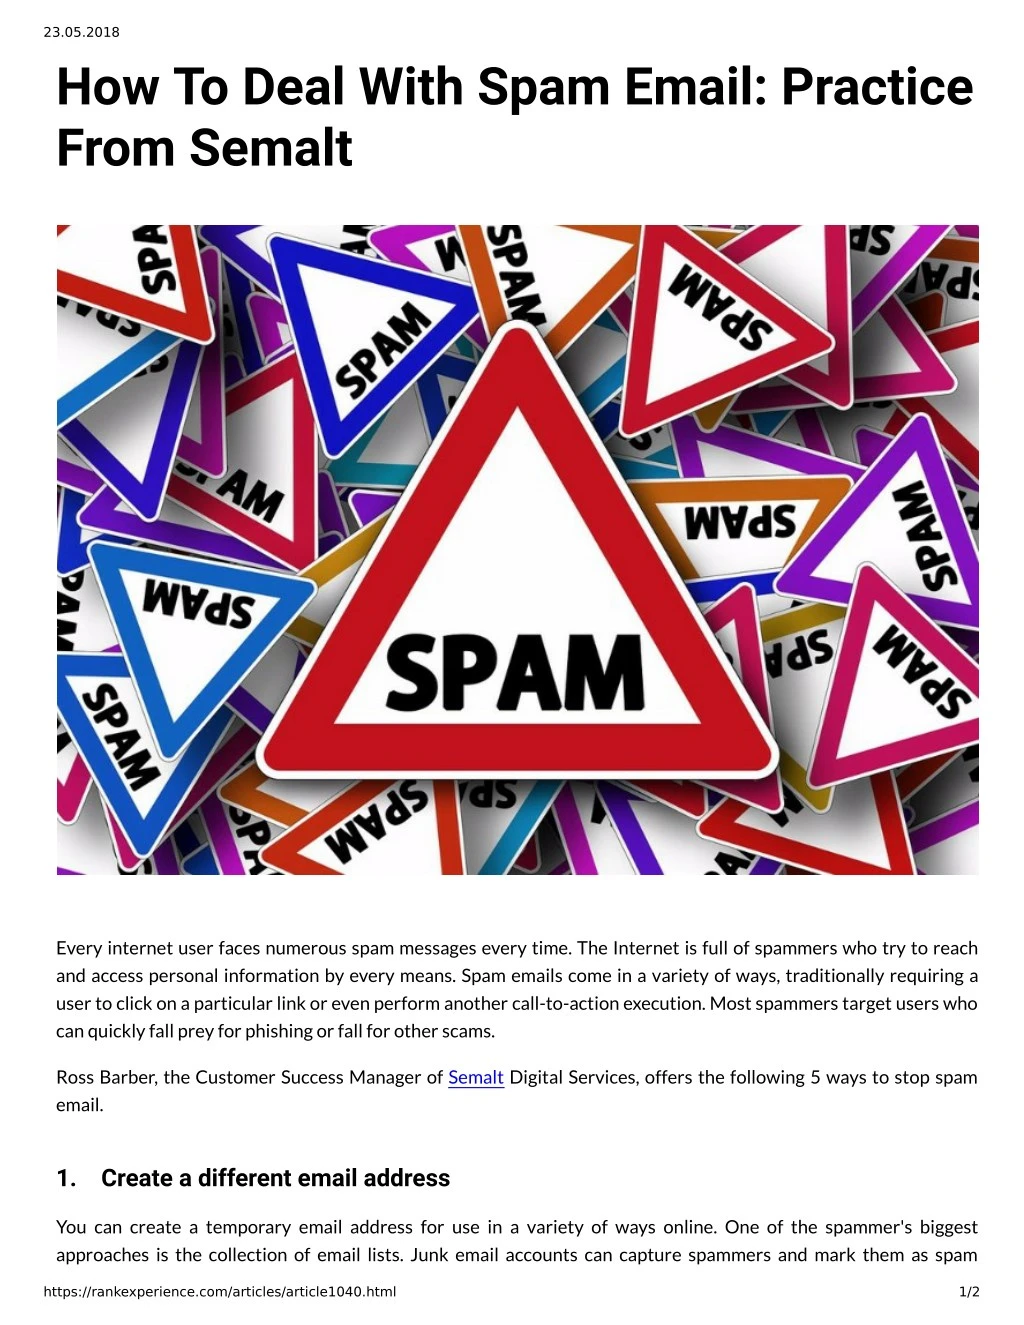 23 05 2018 how to deal with spam email practice